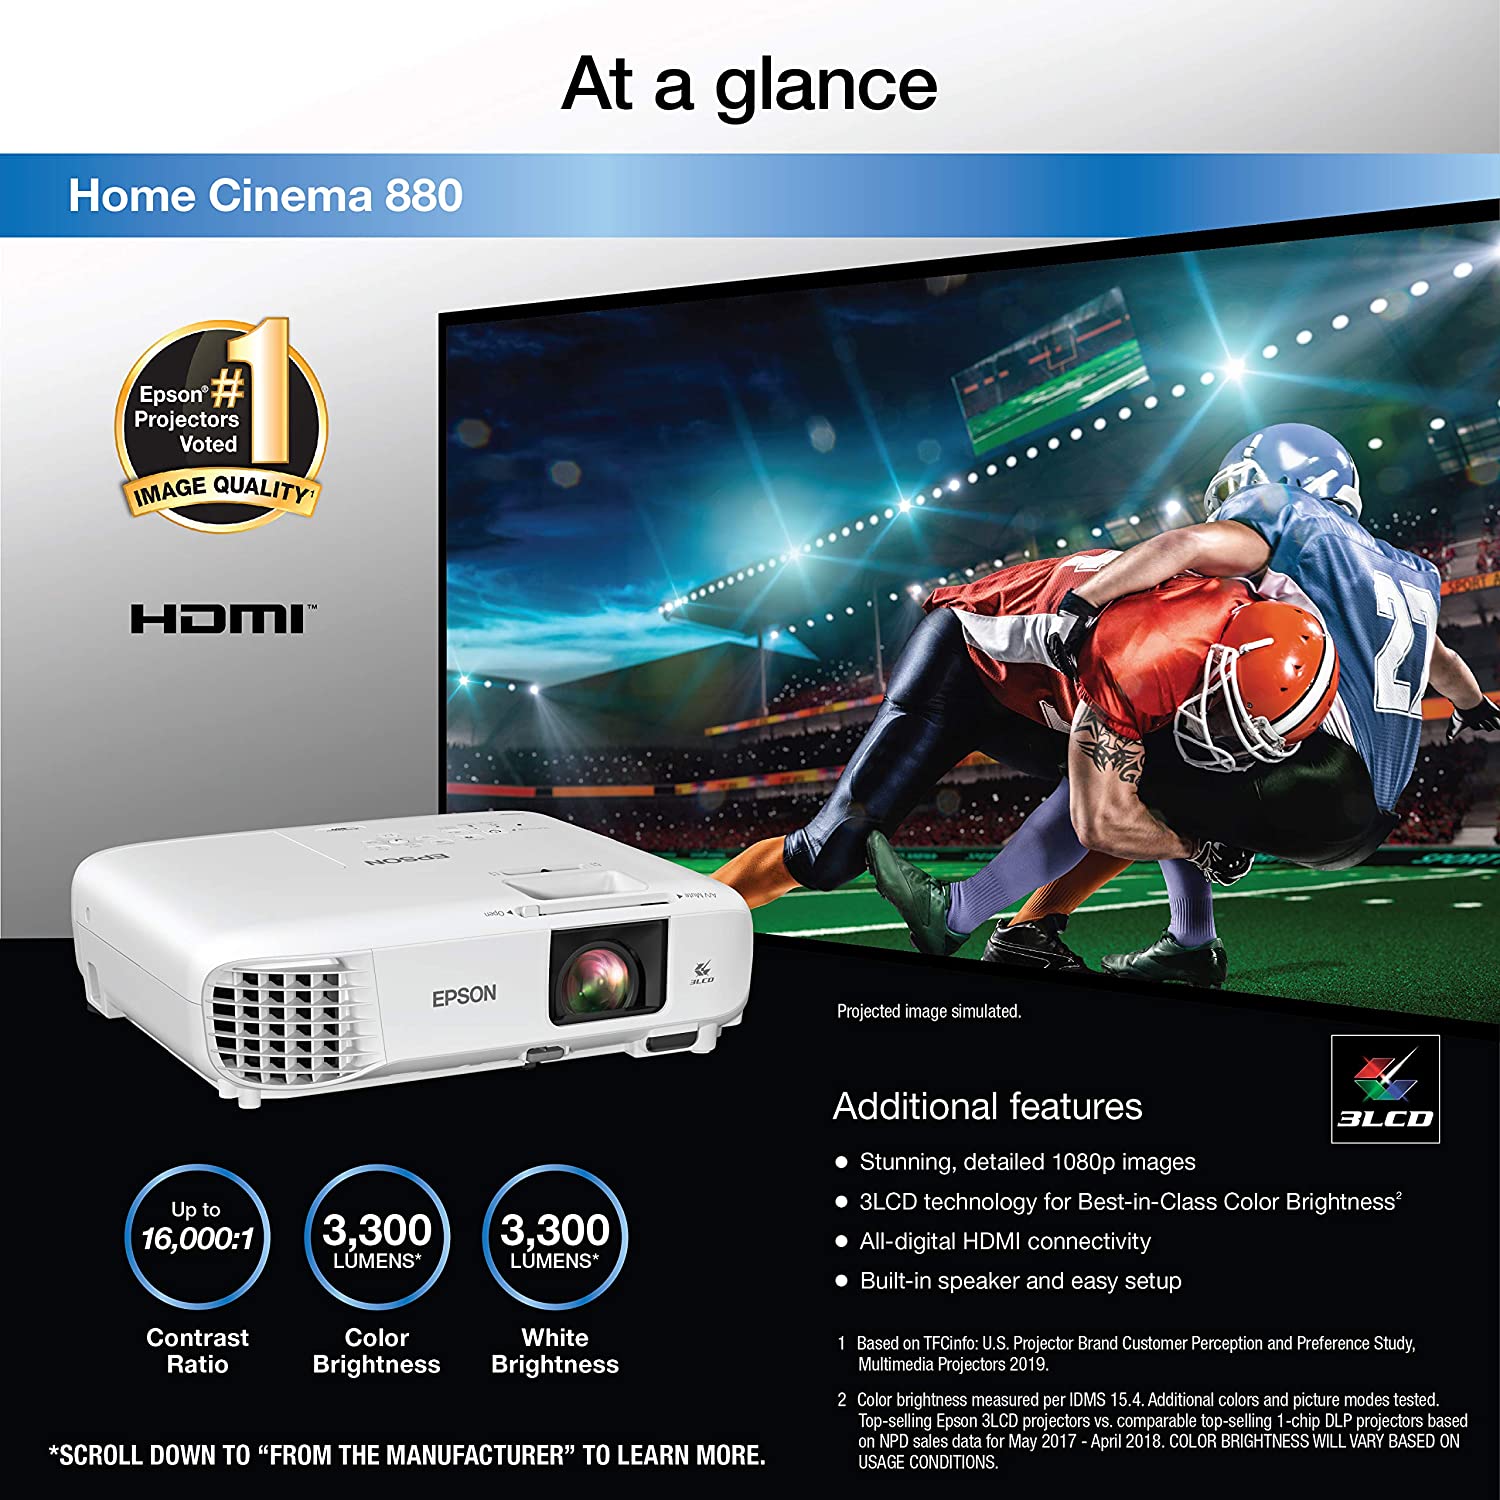 Epson Home Cinema 880 3-chip 3LCD 1080p Projector, 3300 lumens Color and White Brightness, Streaming and Home Theater, Built-in Speaker, Auto Picture Skew